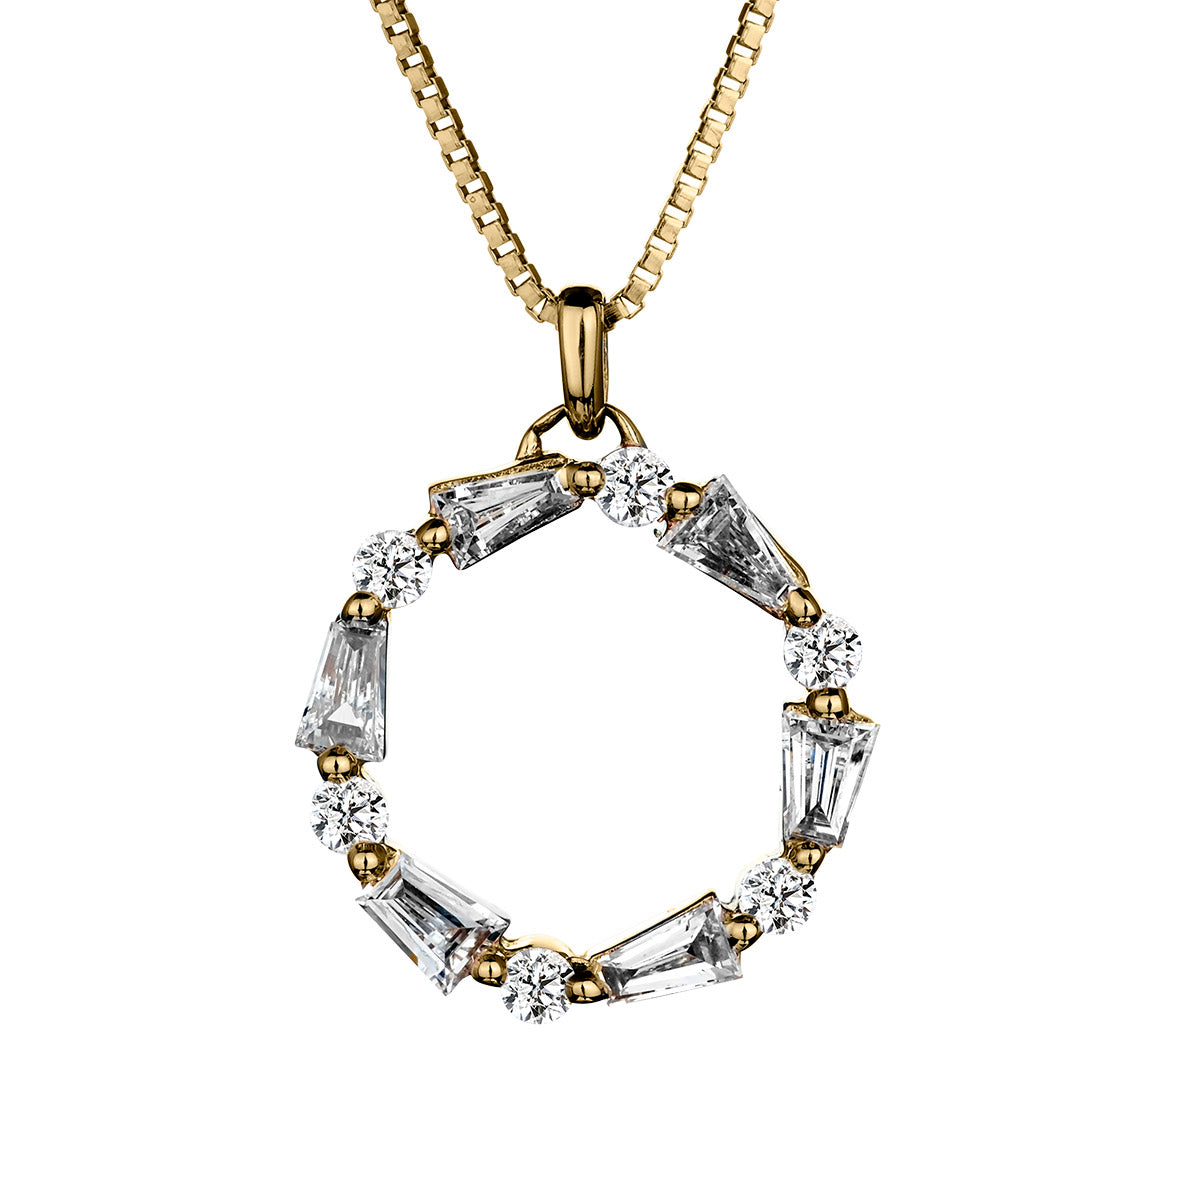 .25 Carat of Diamonds "Circle of Love" Pendant  14kt Yellow Gold. Necklaces and Pendants. Griffin Jewellery Designs.